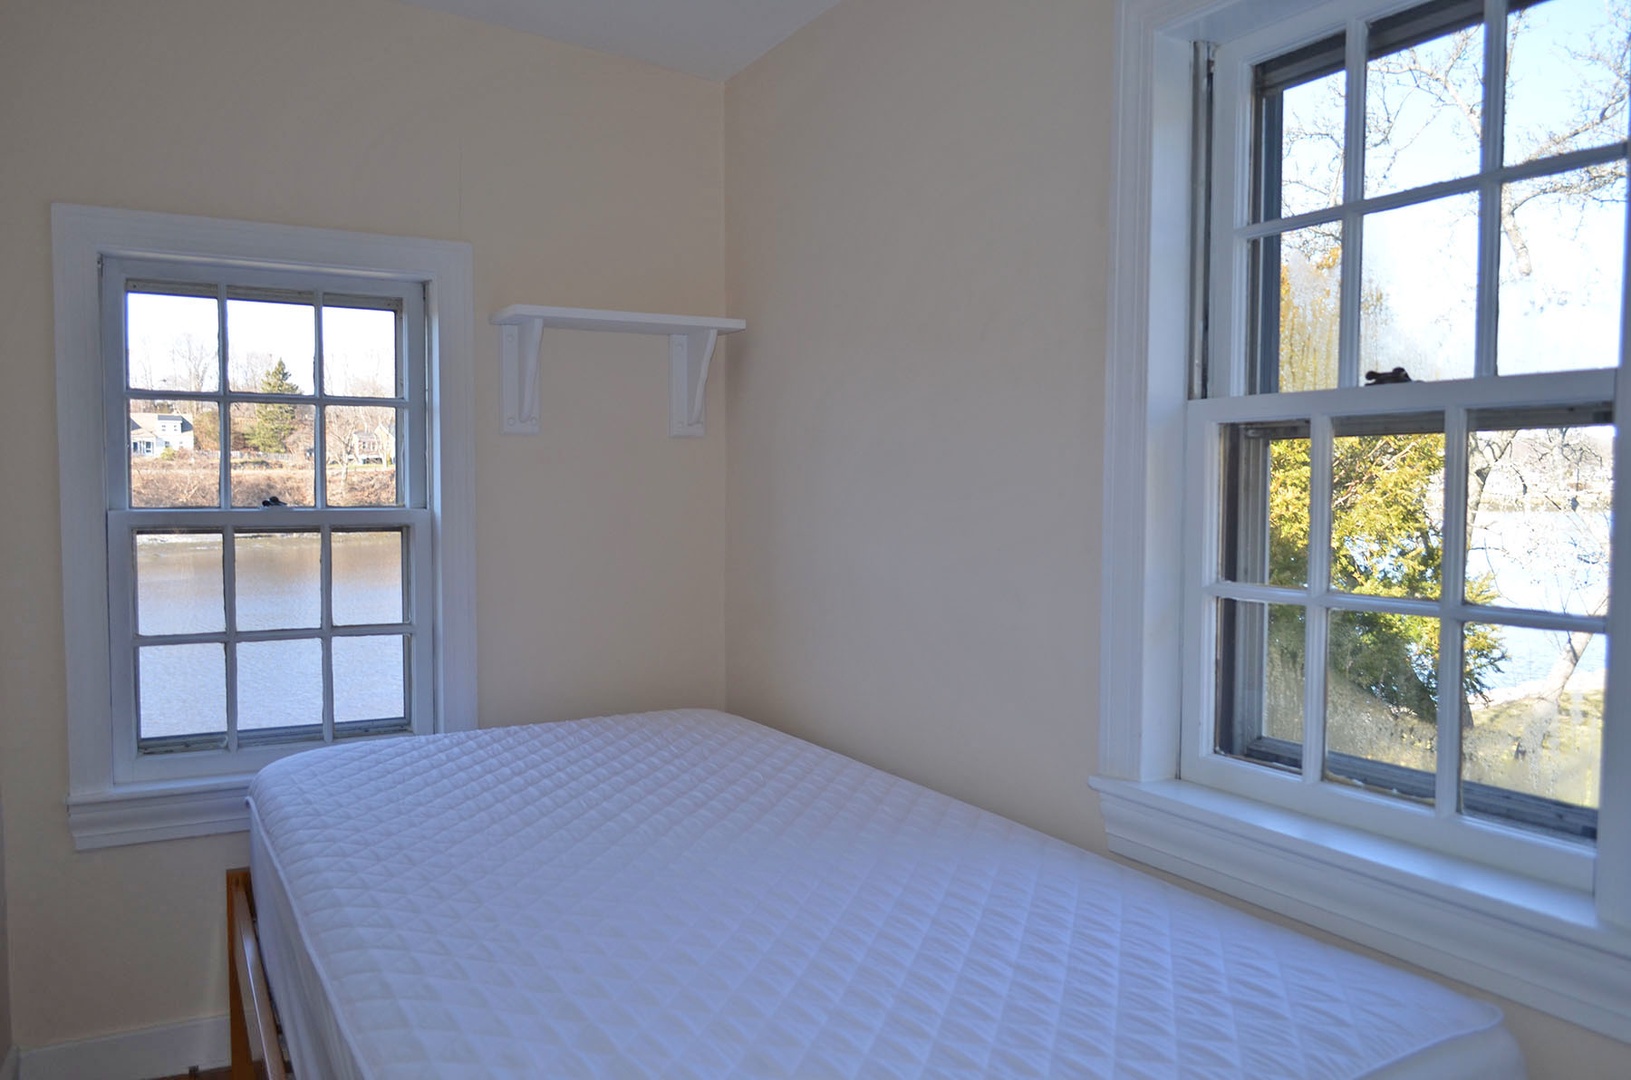 BR3: This corner bedroom has a Twin bed and water views.